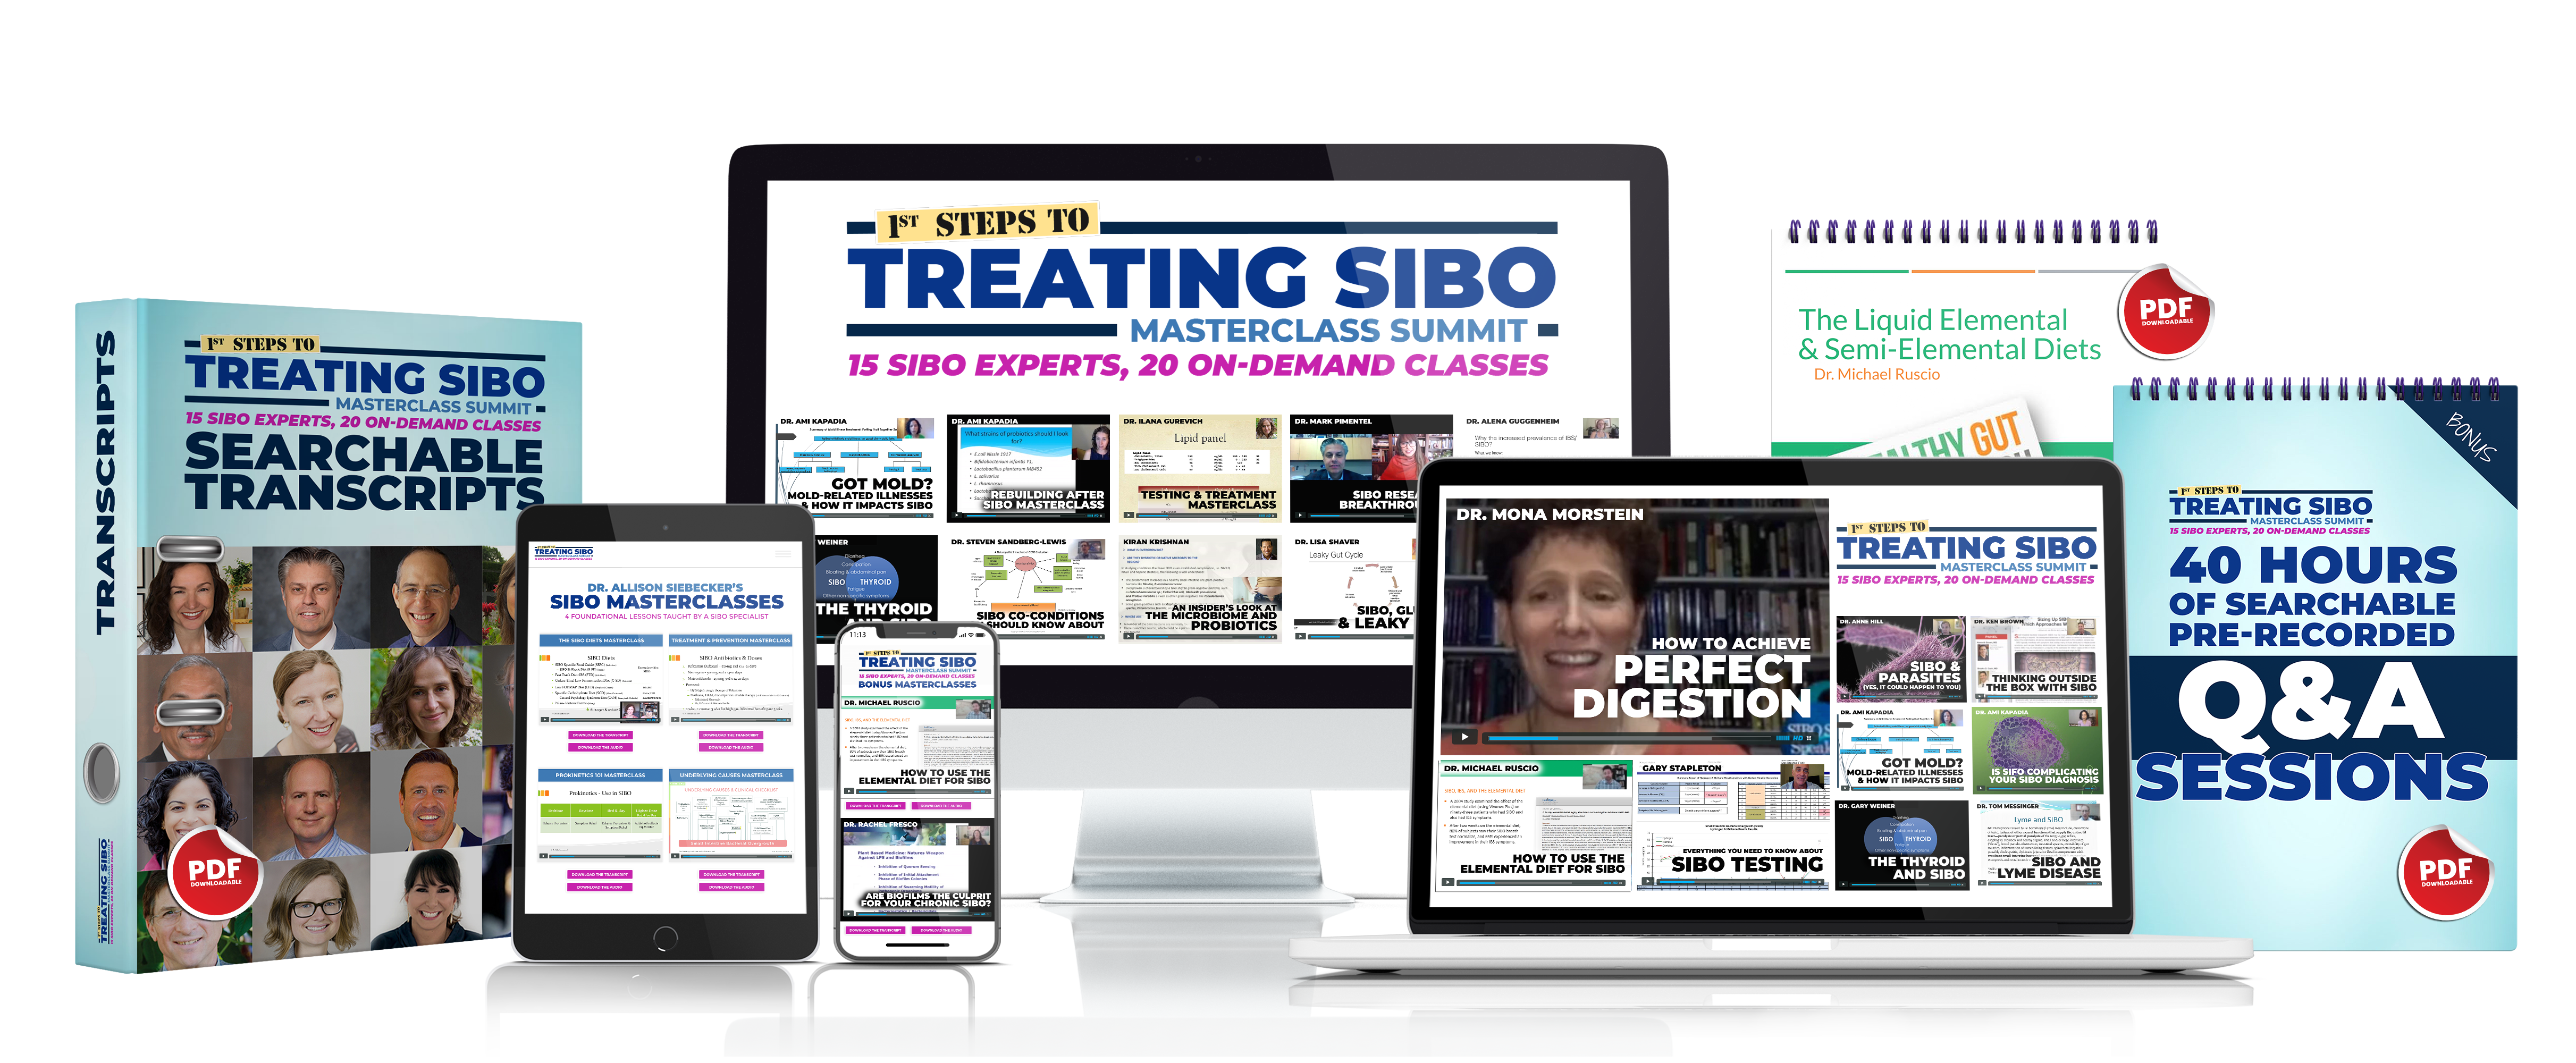 1st Steps to Treating SIBO Masterclass Summit